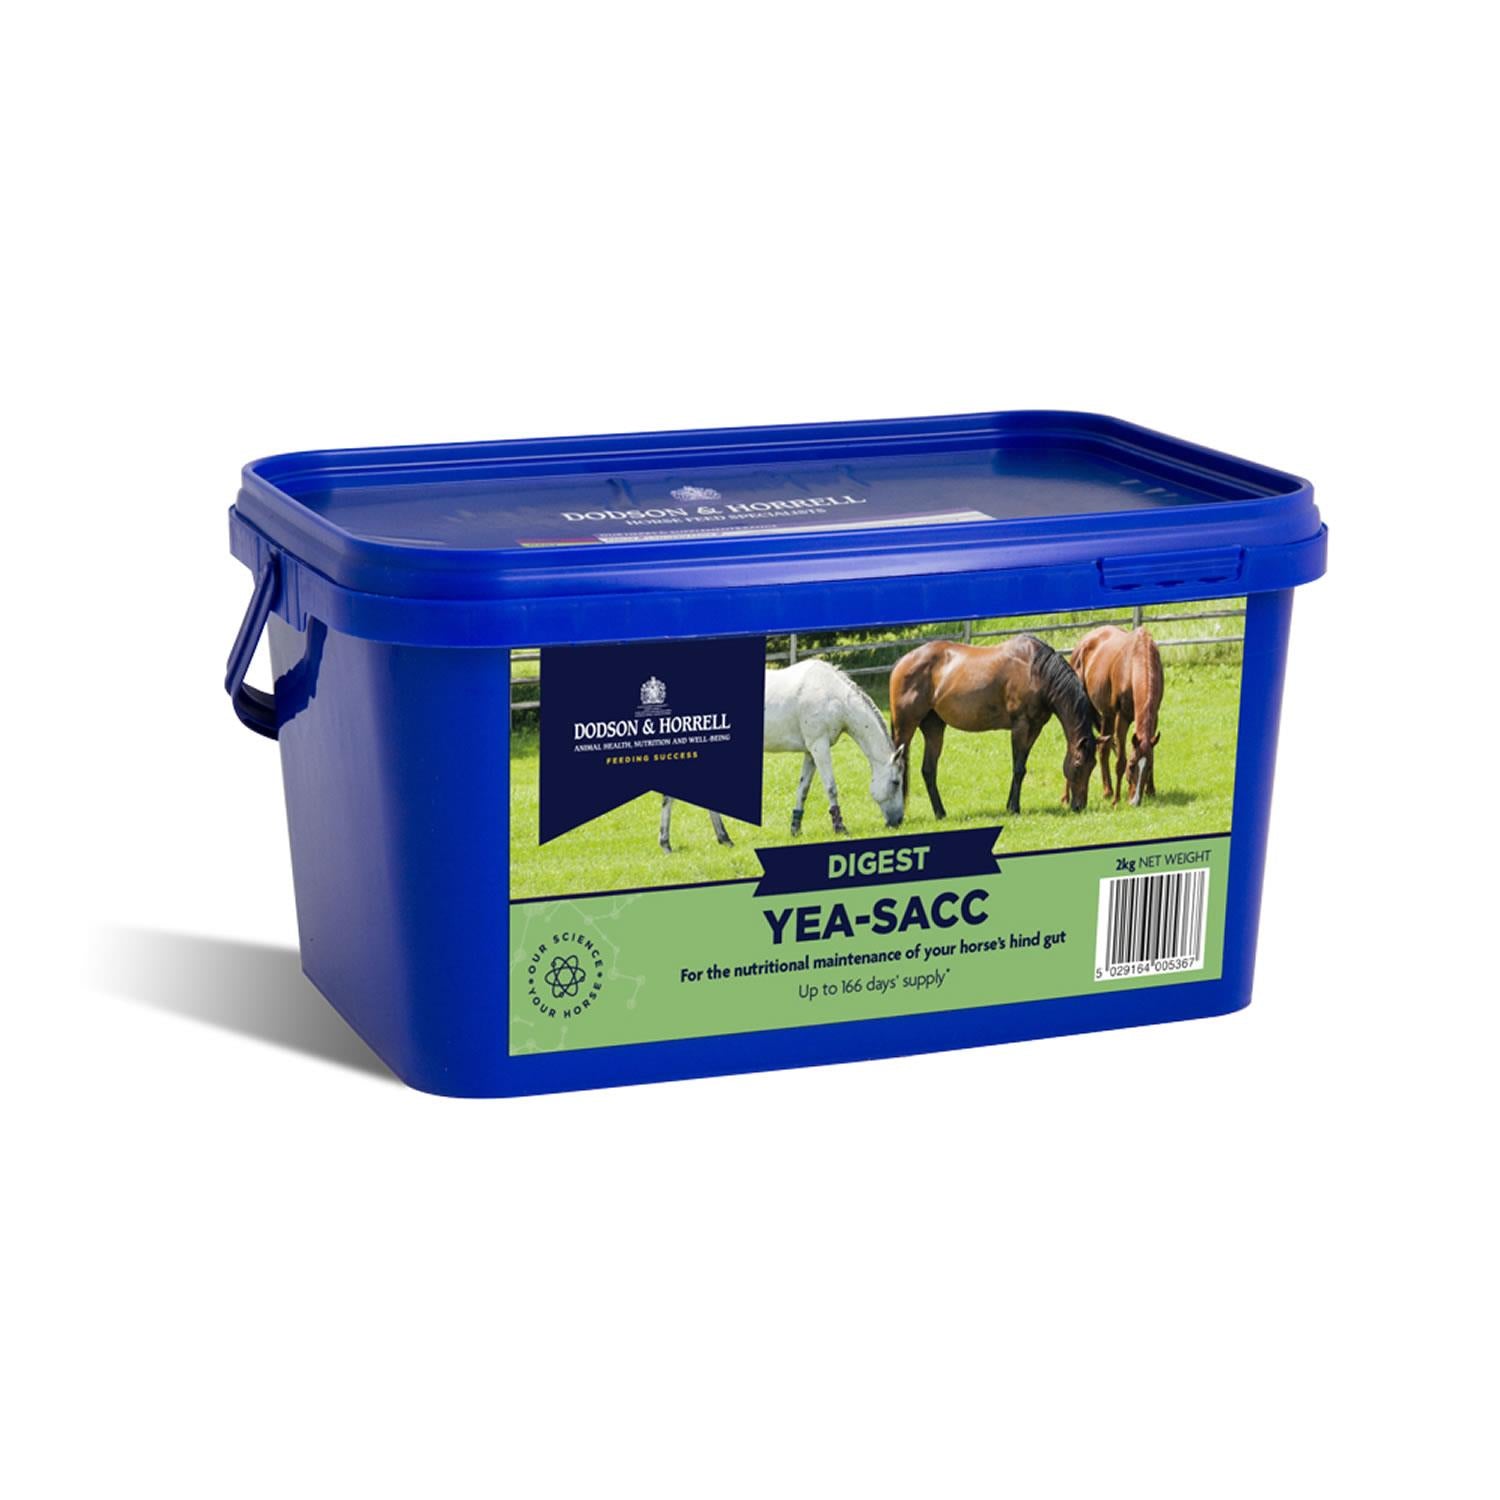 Dodson & Horrell Yea-Sacc aids in maintaining horse's hindgut health